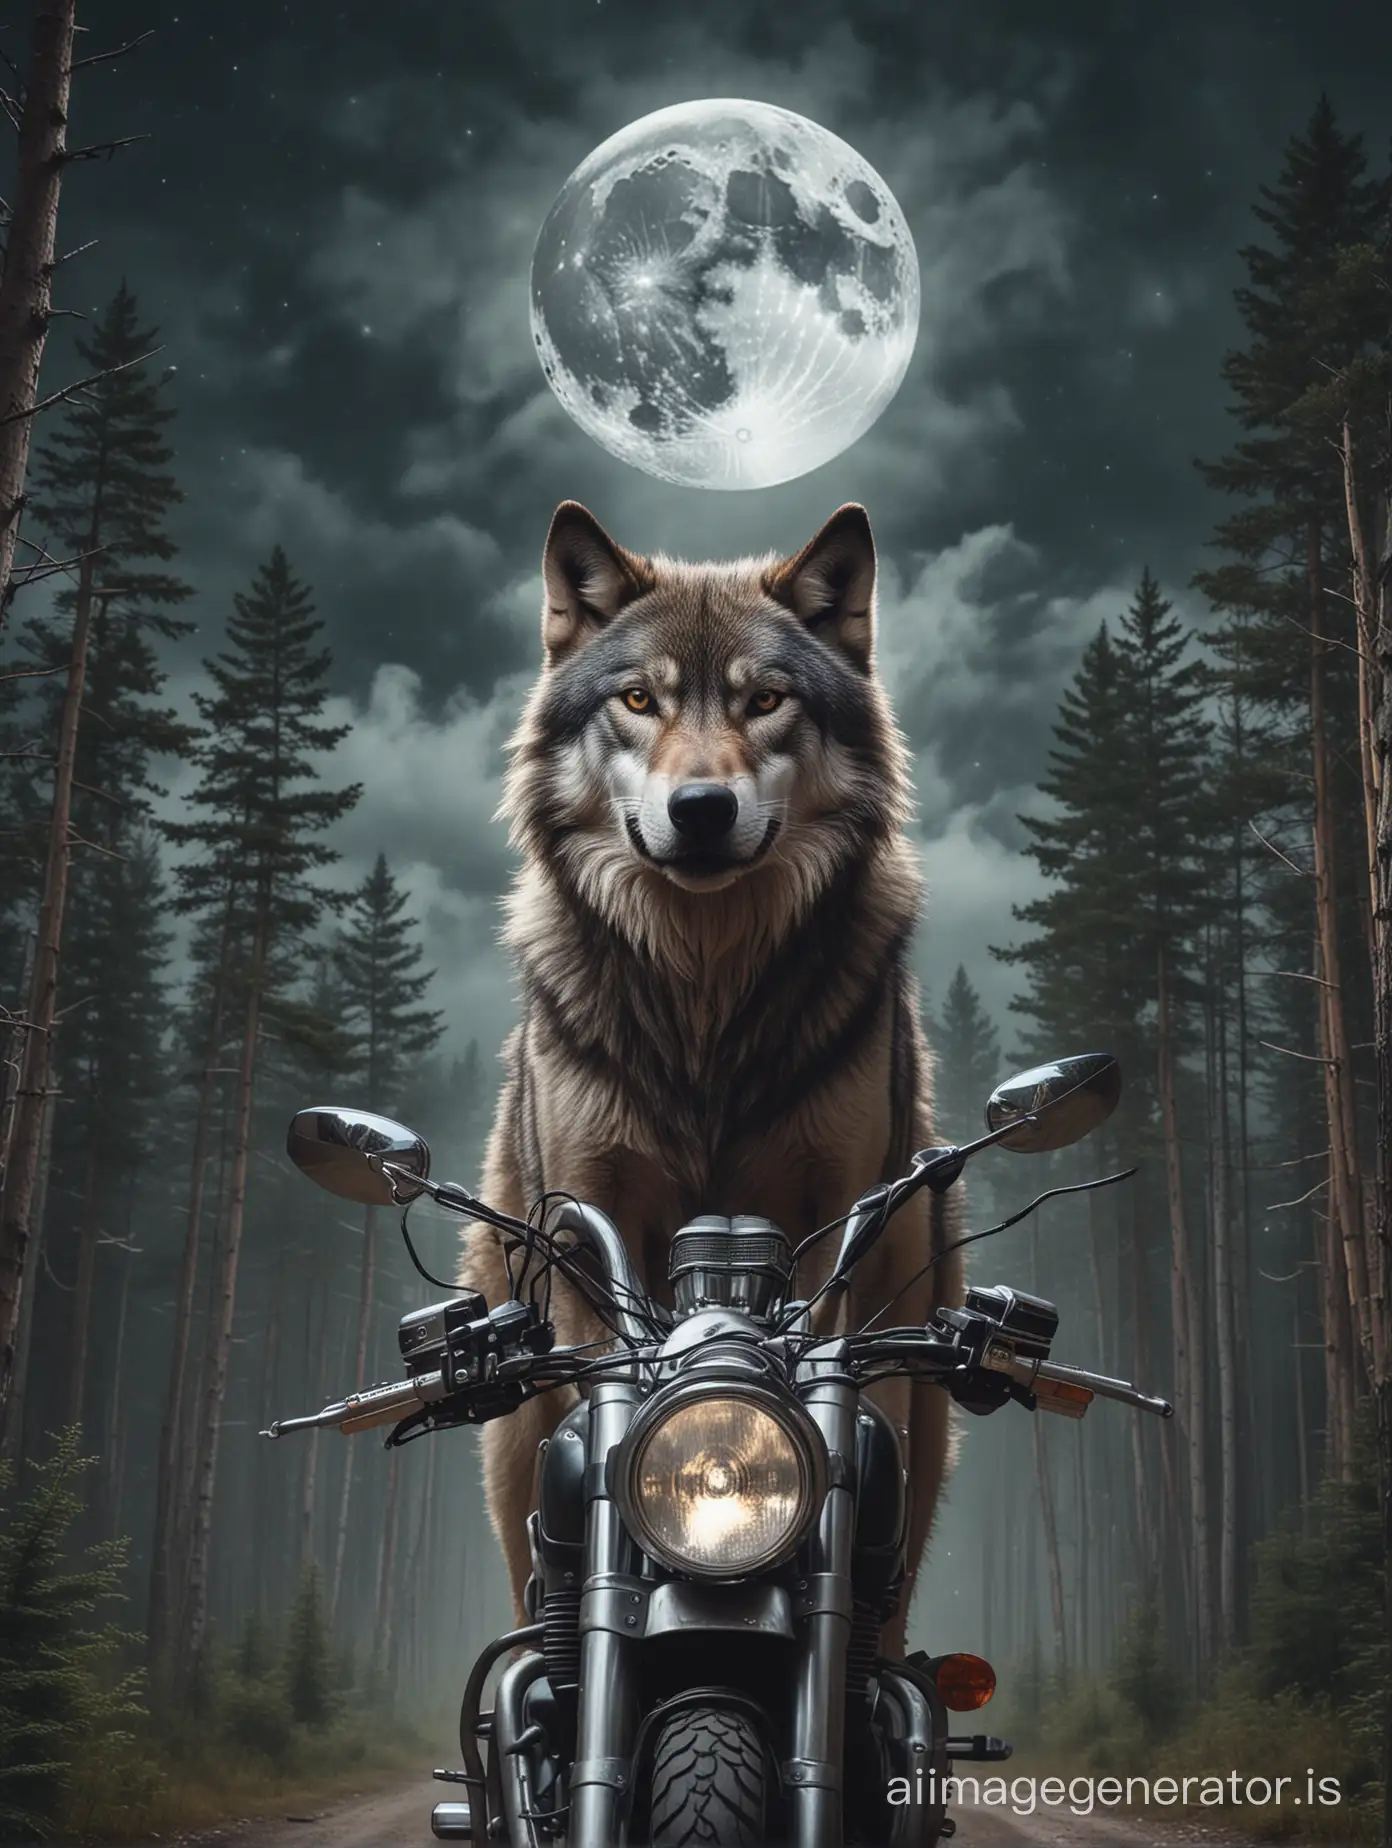 Majestic-Wolf-Howling-at-Moon-Over-Mountainous-Landscape-with-Motorcycle